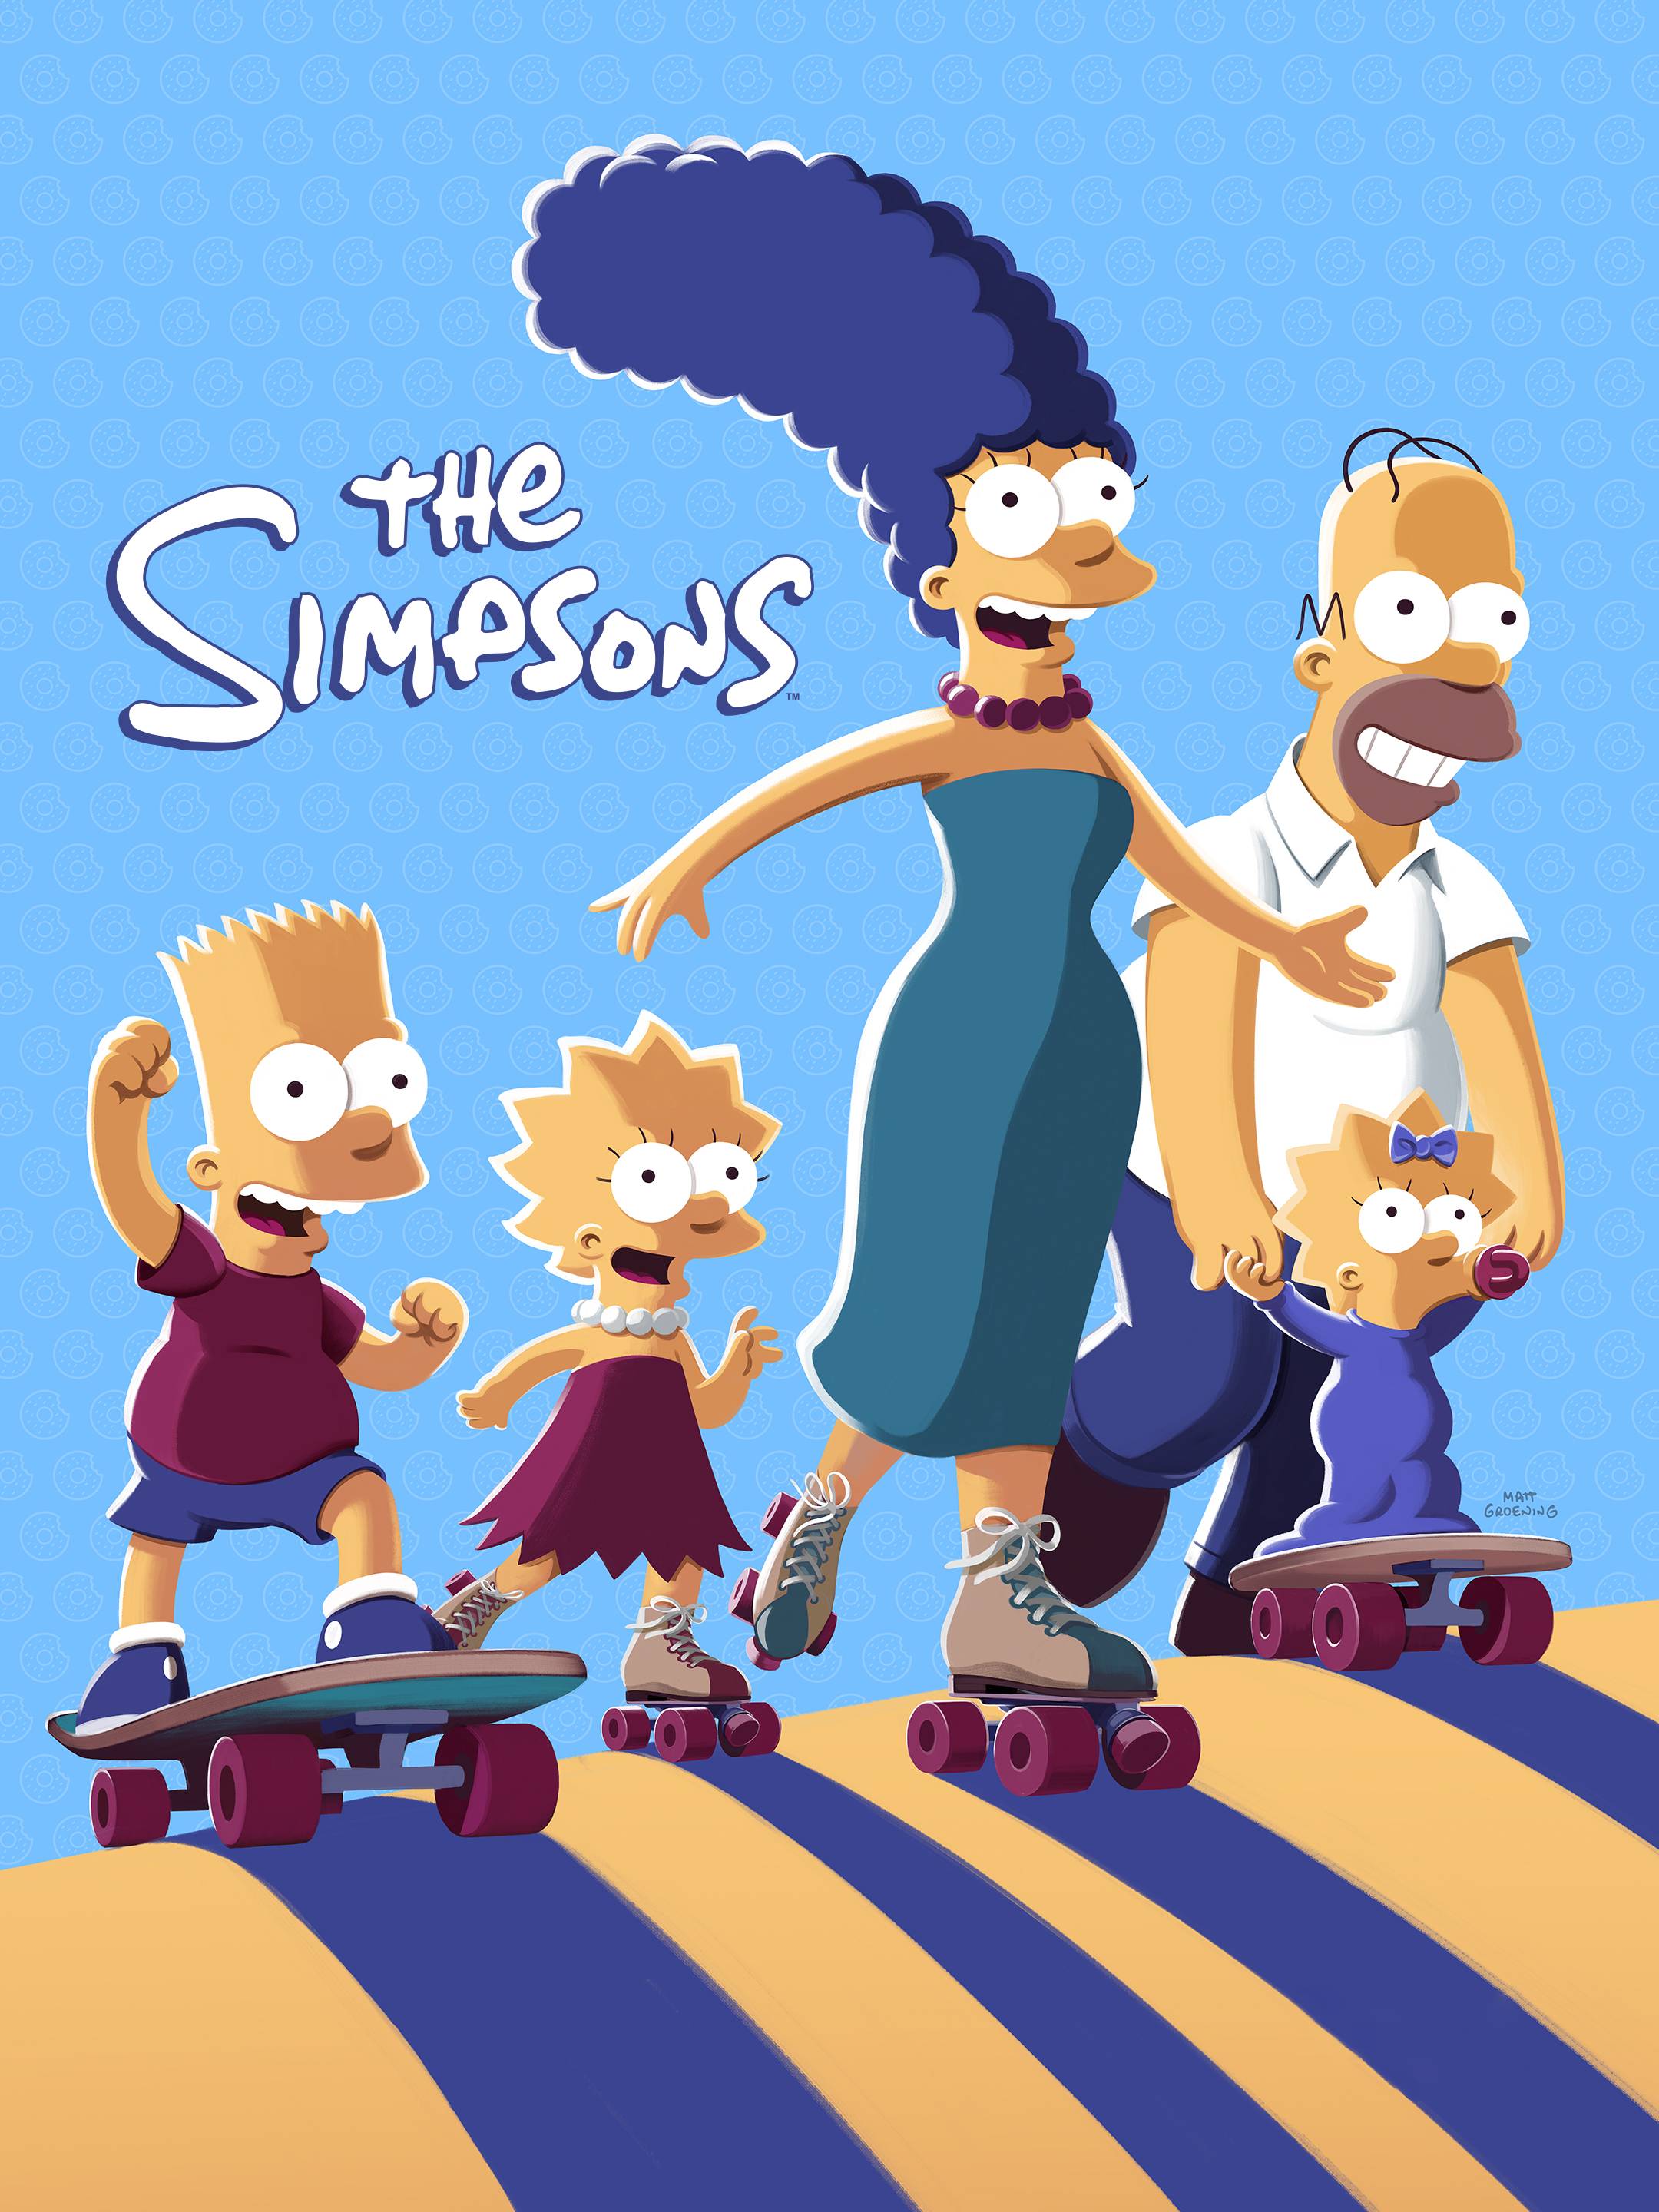 The Simpsons Season 23 Episodes - TV Guide